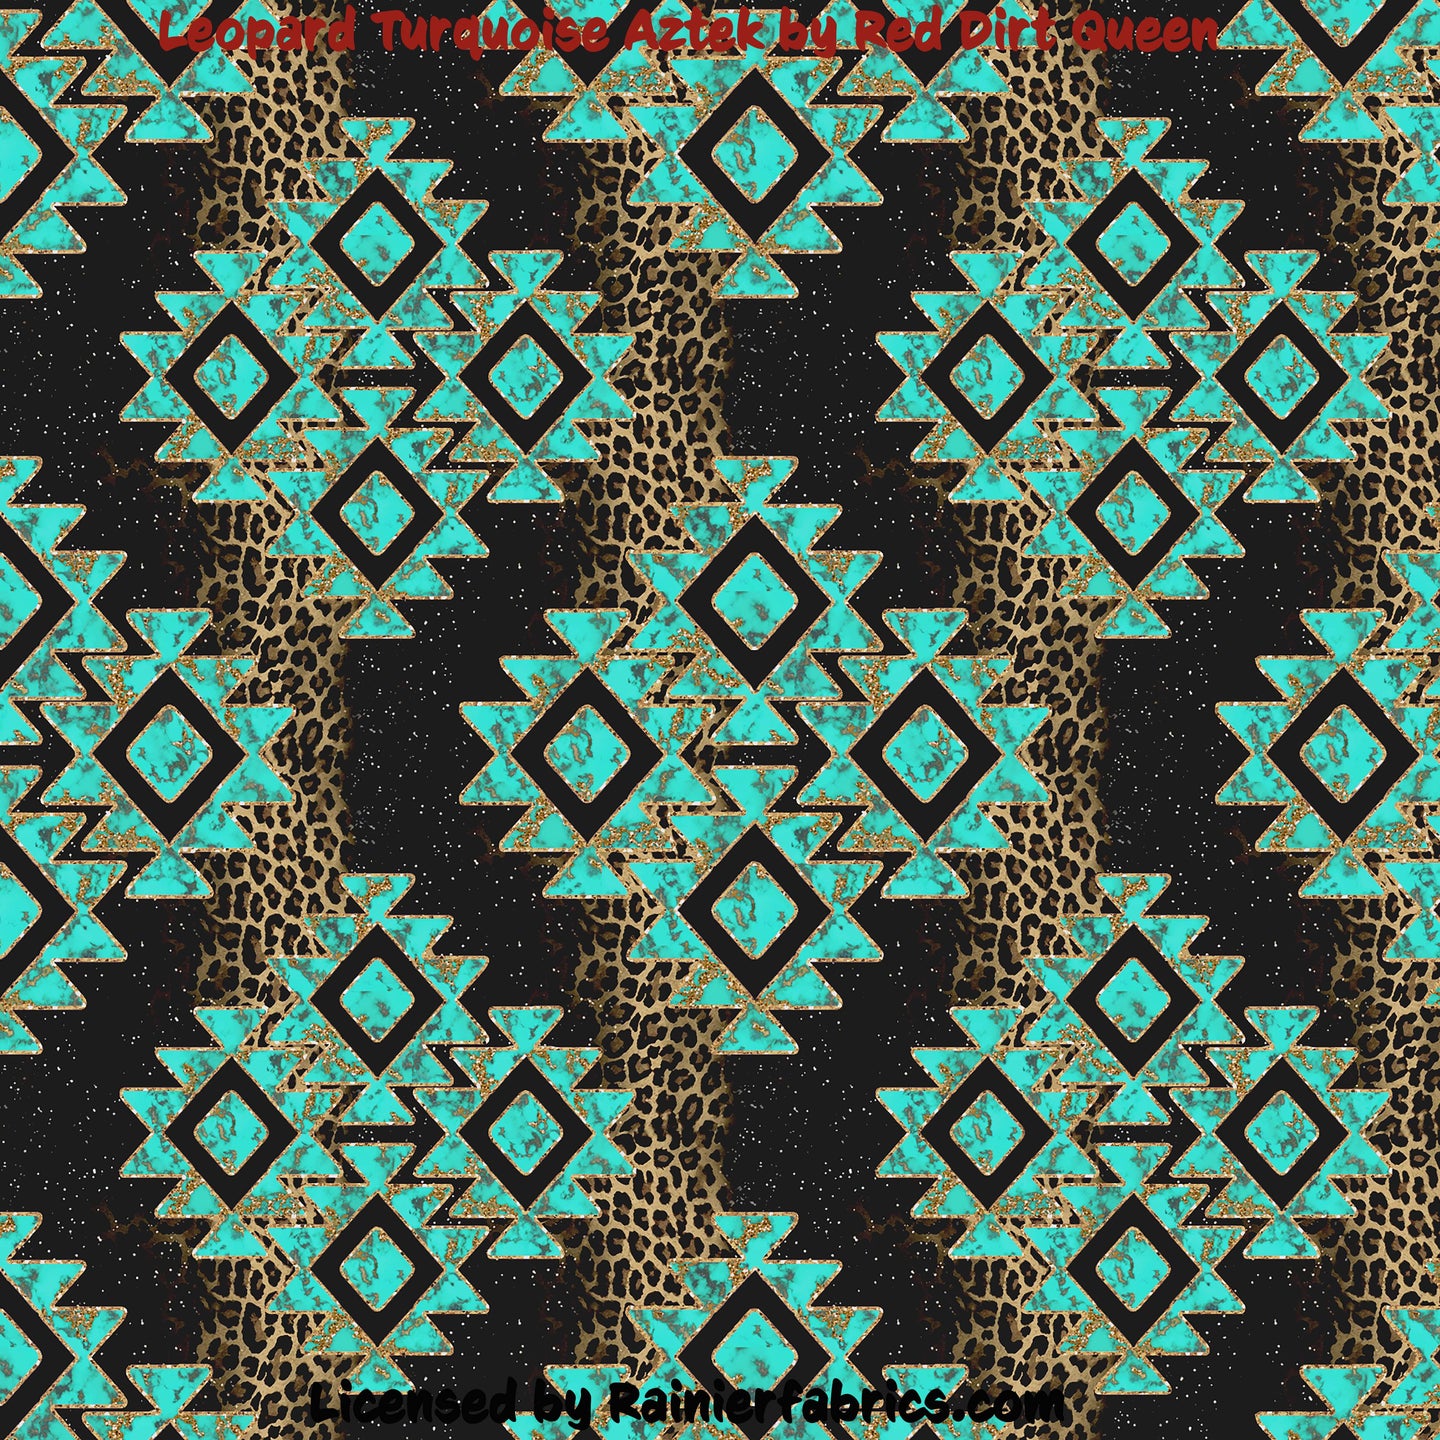 Leopard Turquoise Aztek by Red Dirt Queen - 2-5 day turnaround - Order by 1/2 yard; Description of bases below